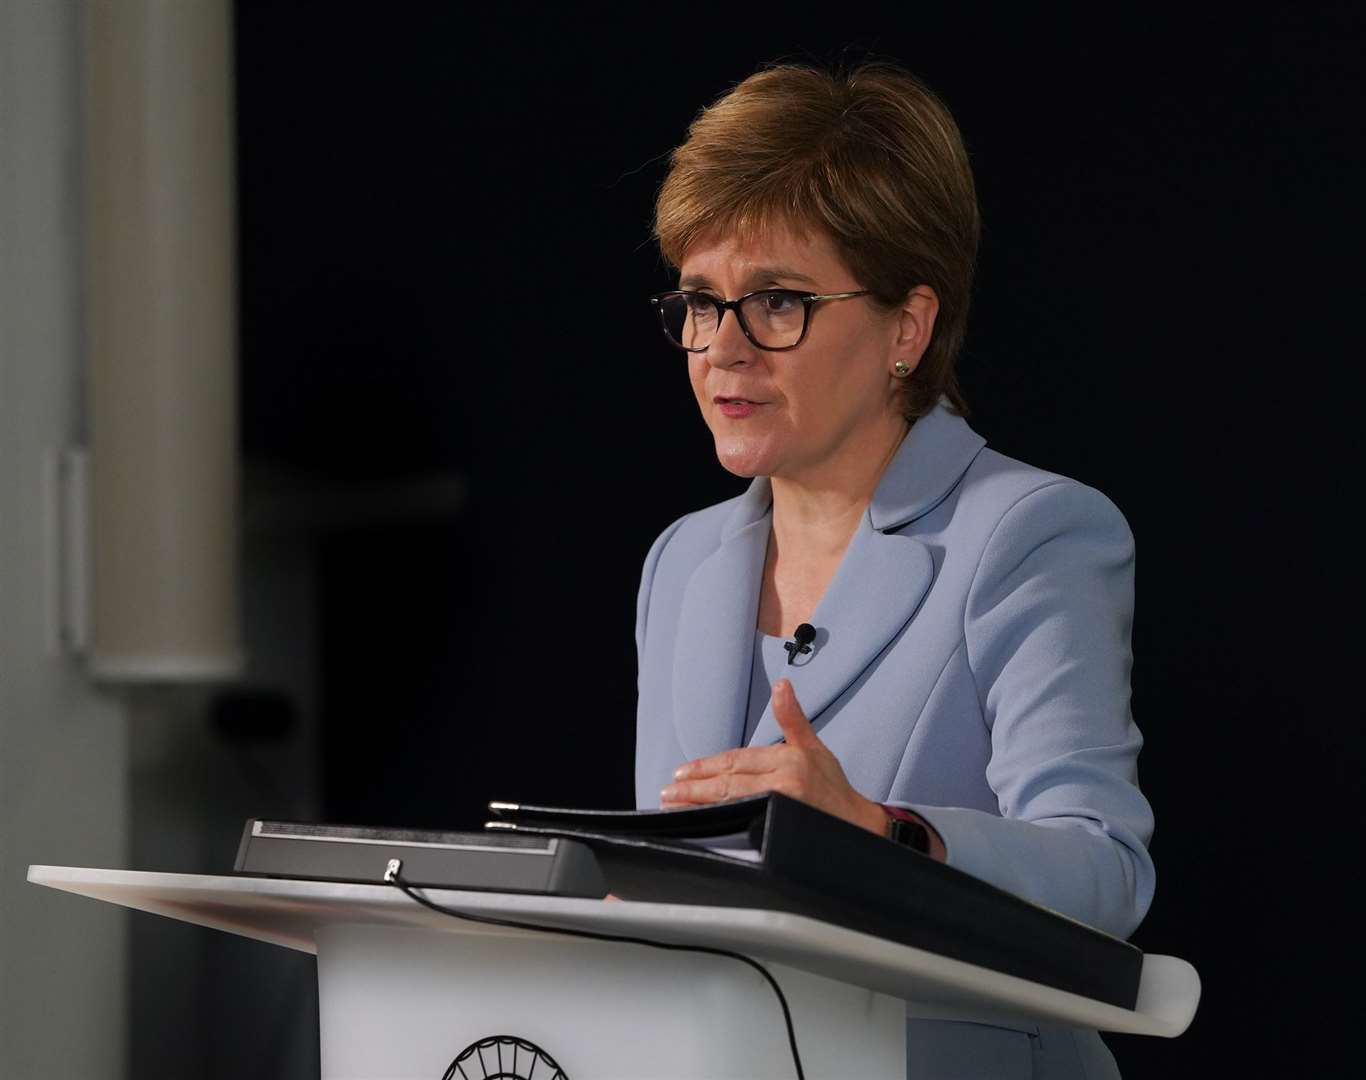 First Minister Nicola Sturgeon has issued a posthumous apology to those who were accused.